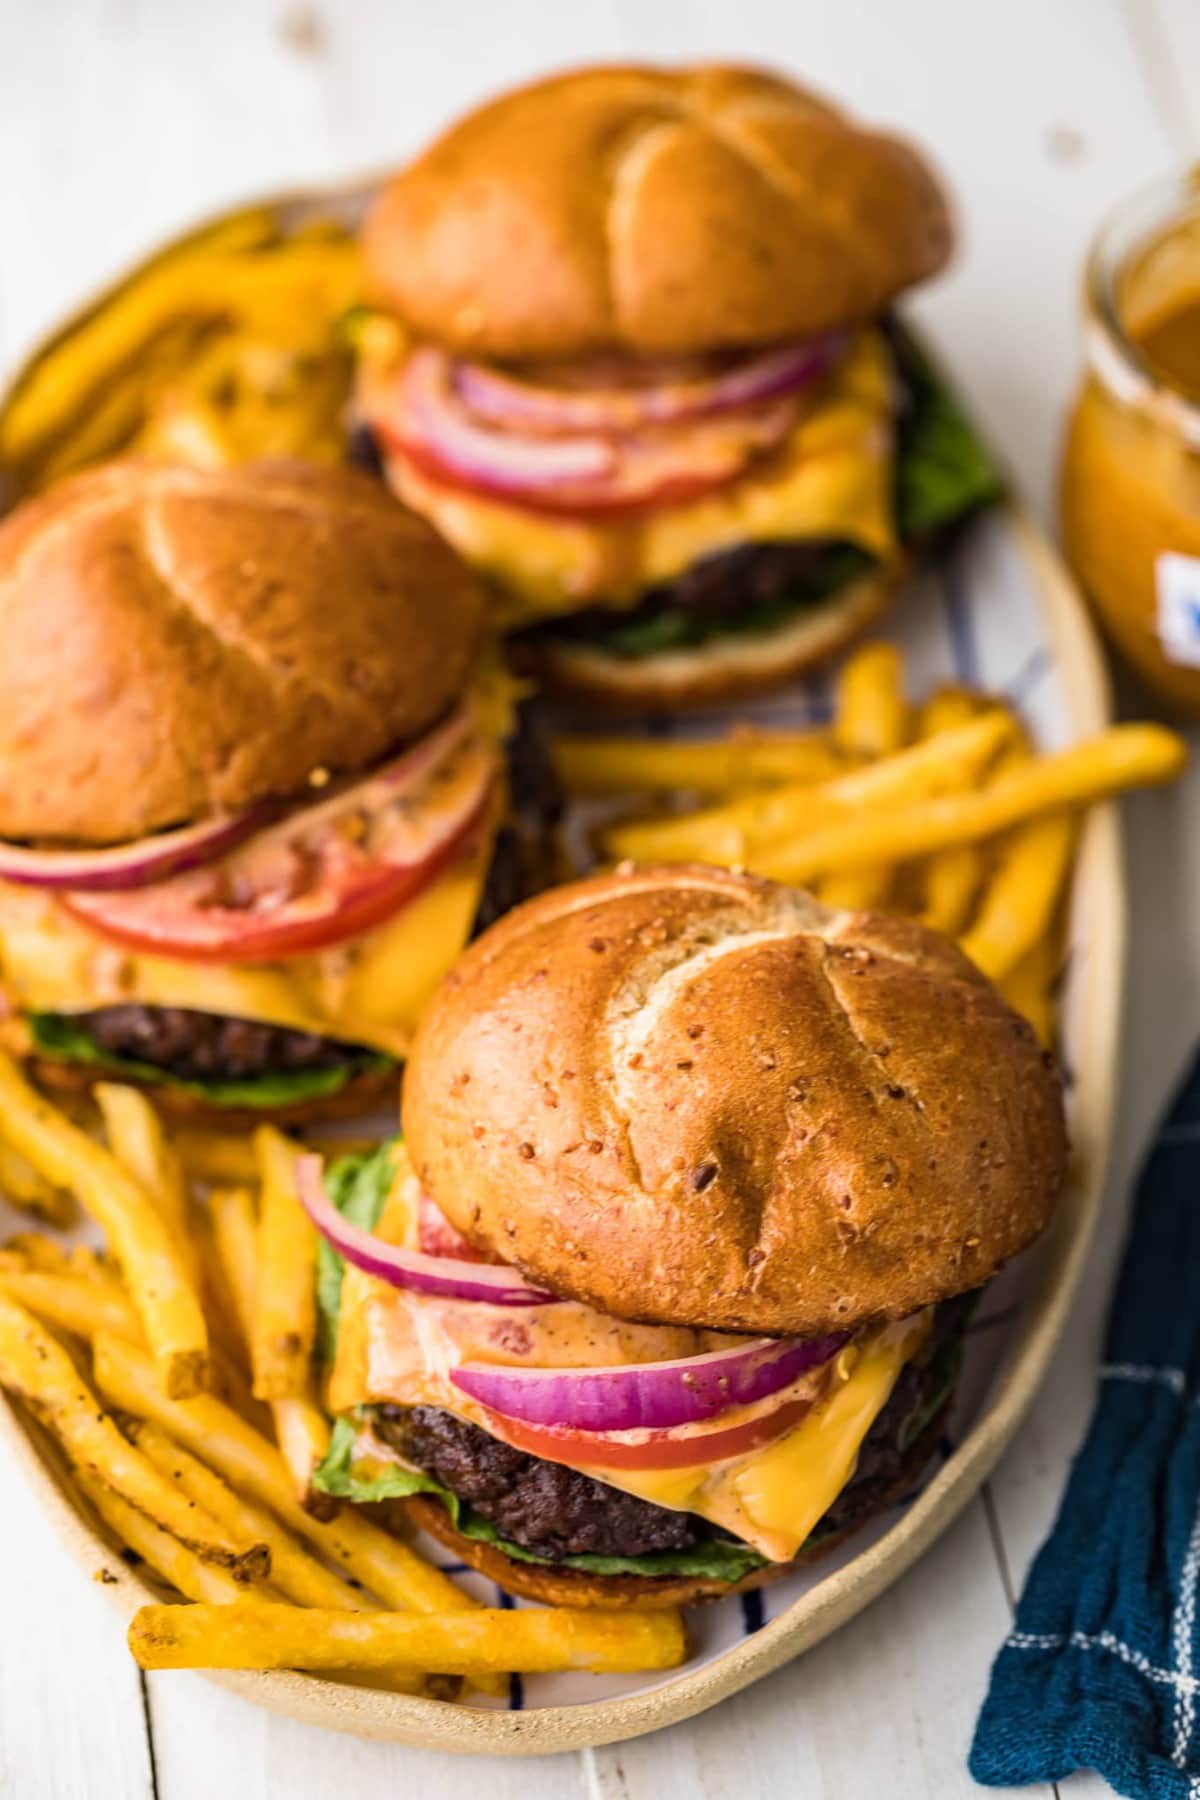 How to Grill Burgers: Tips and Tricks for the Perfect Grilled Burger -  Thrillist